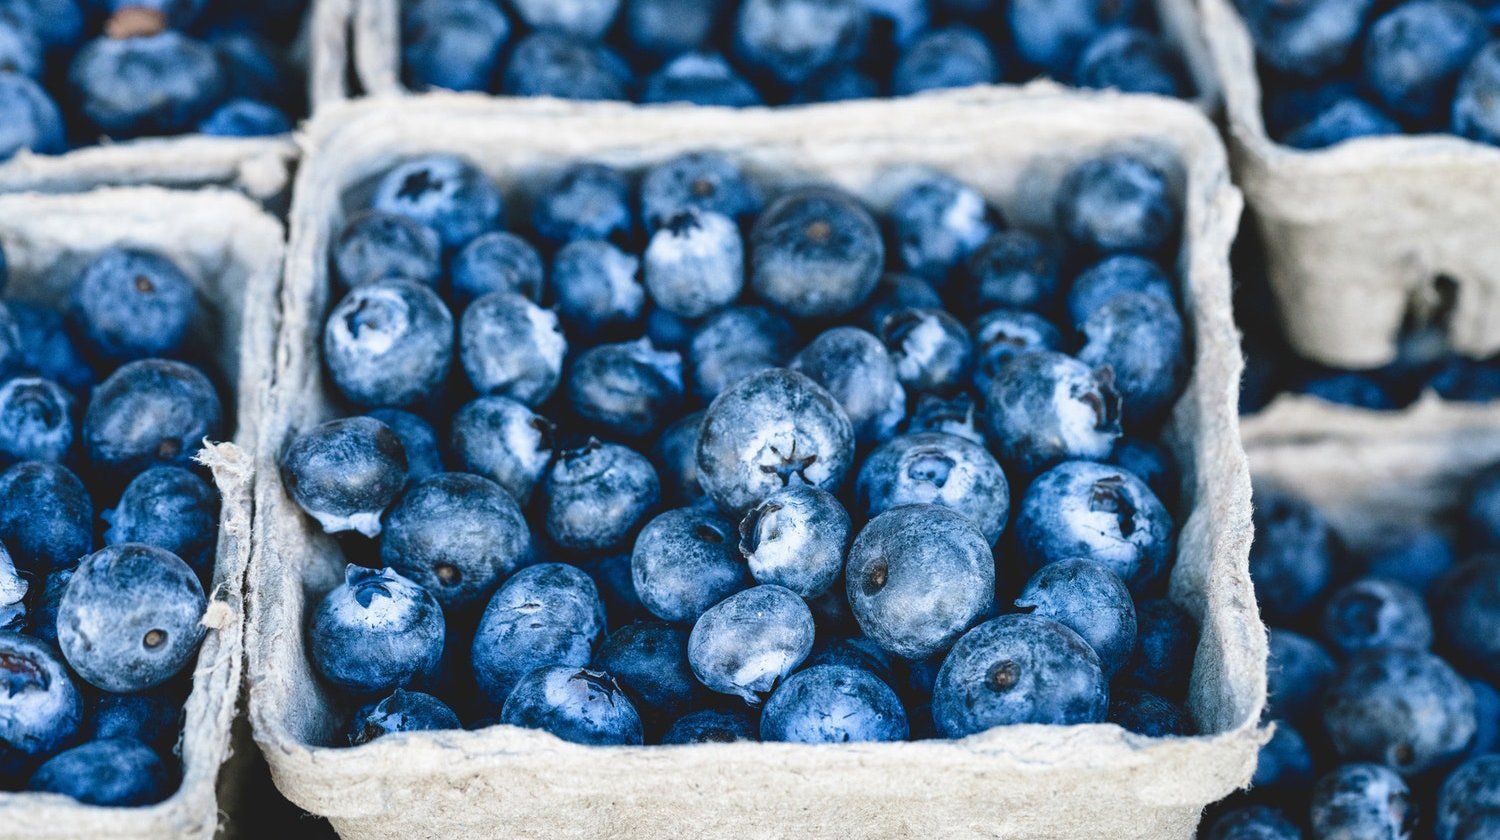 The case for anti-inflammatory foods